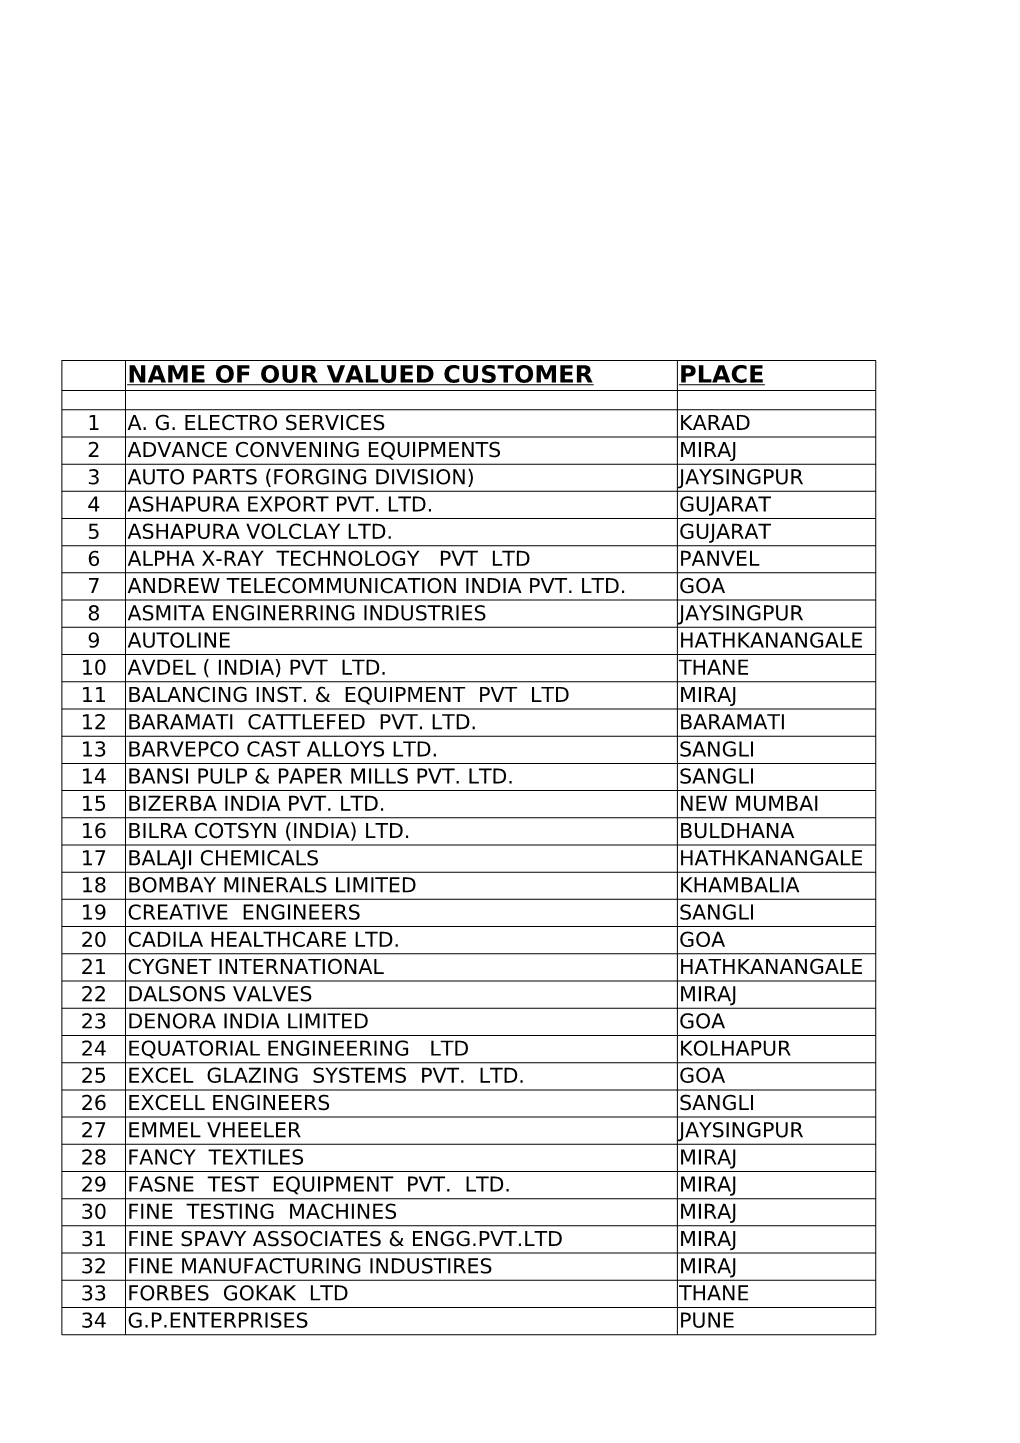 Name of Our Valued Customer Place